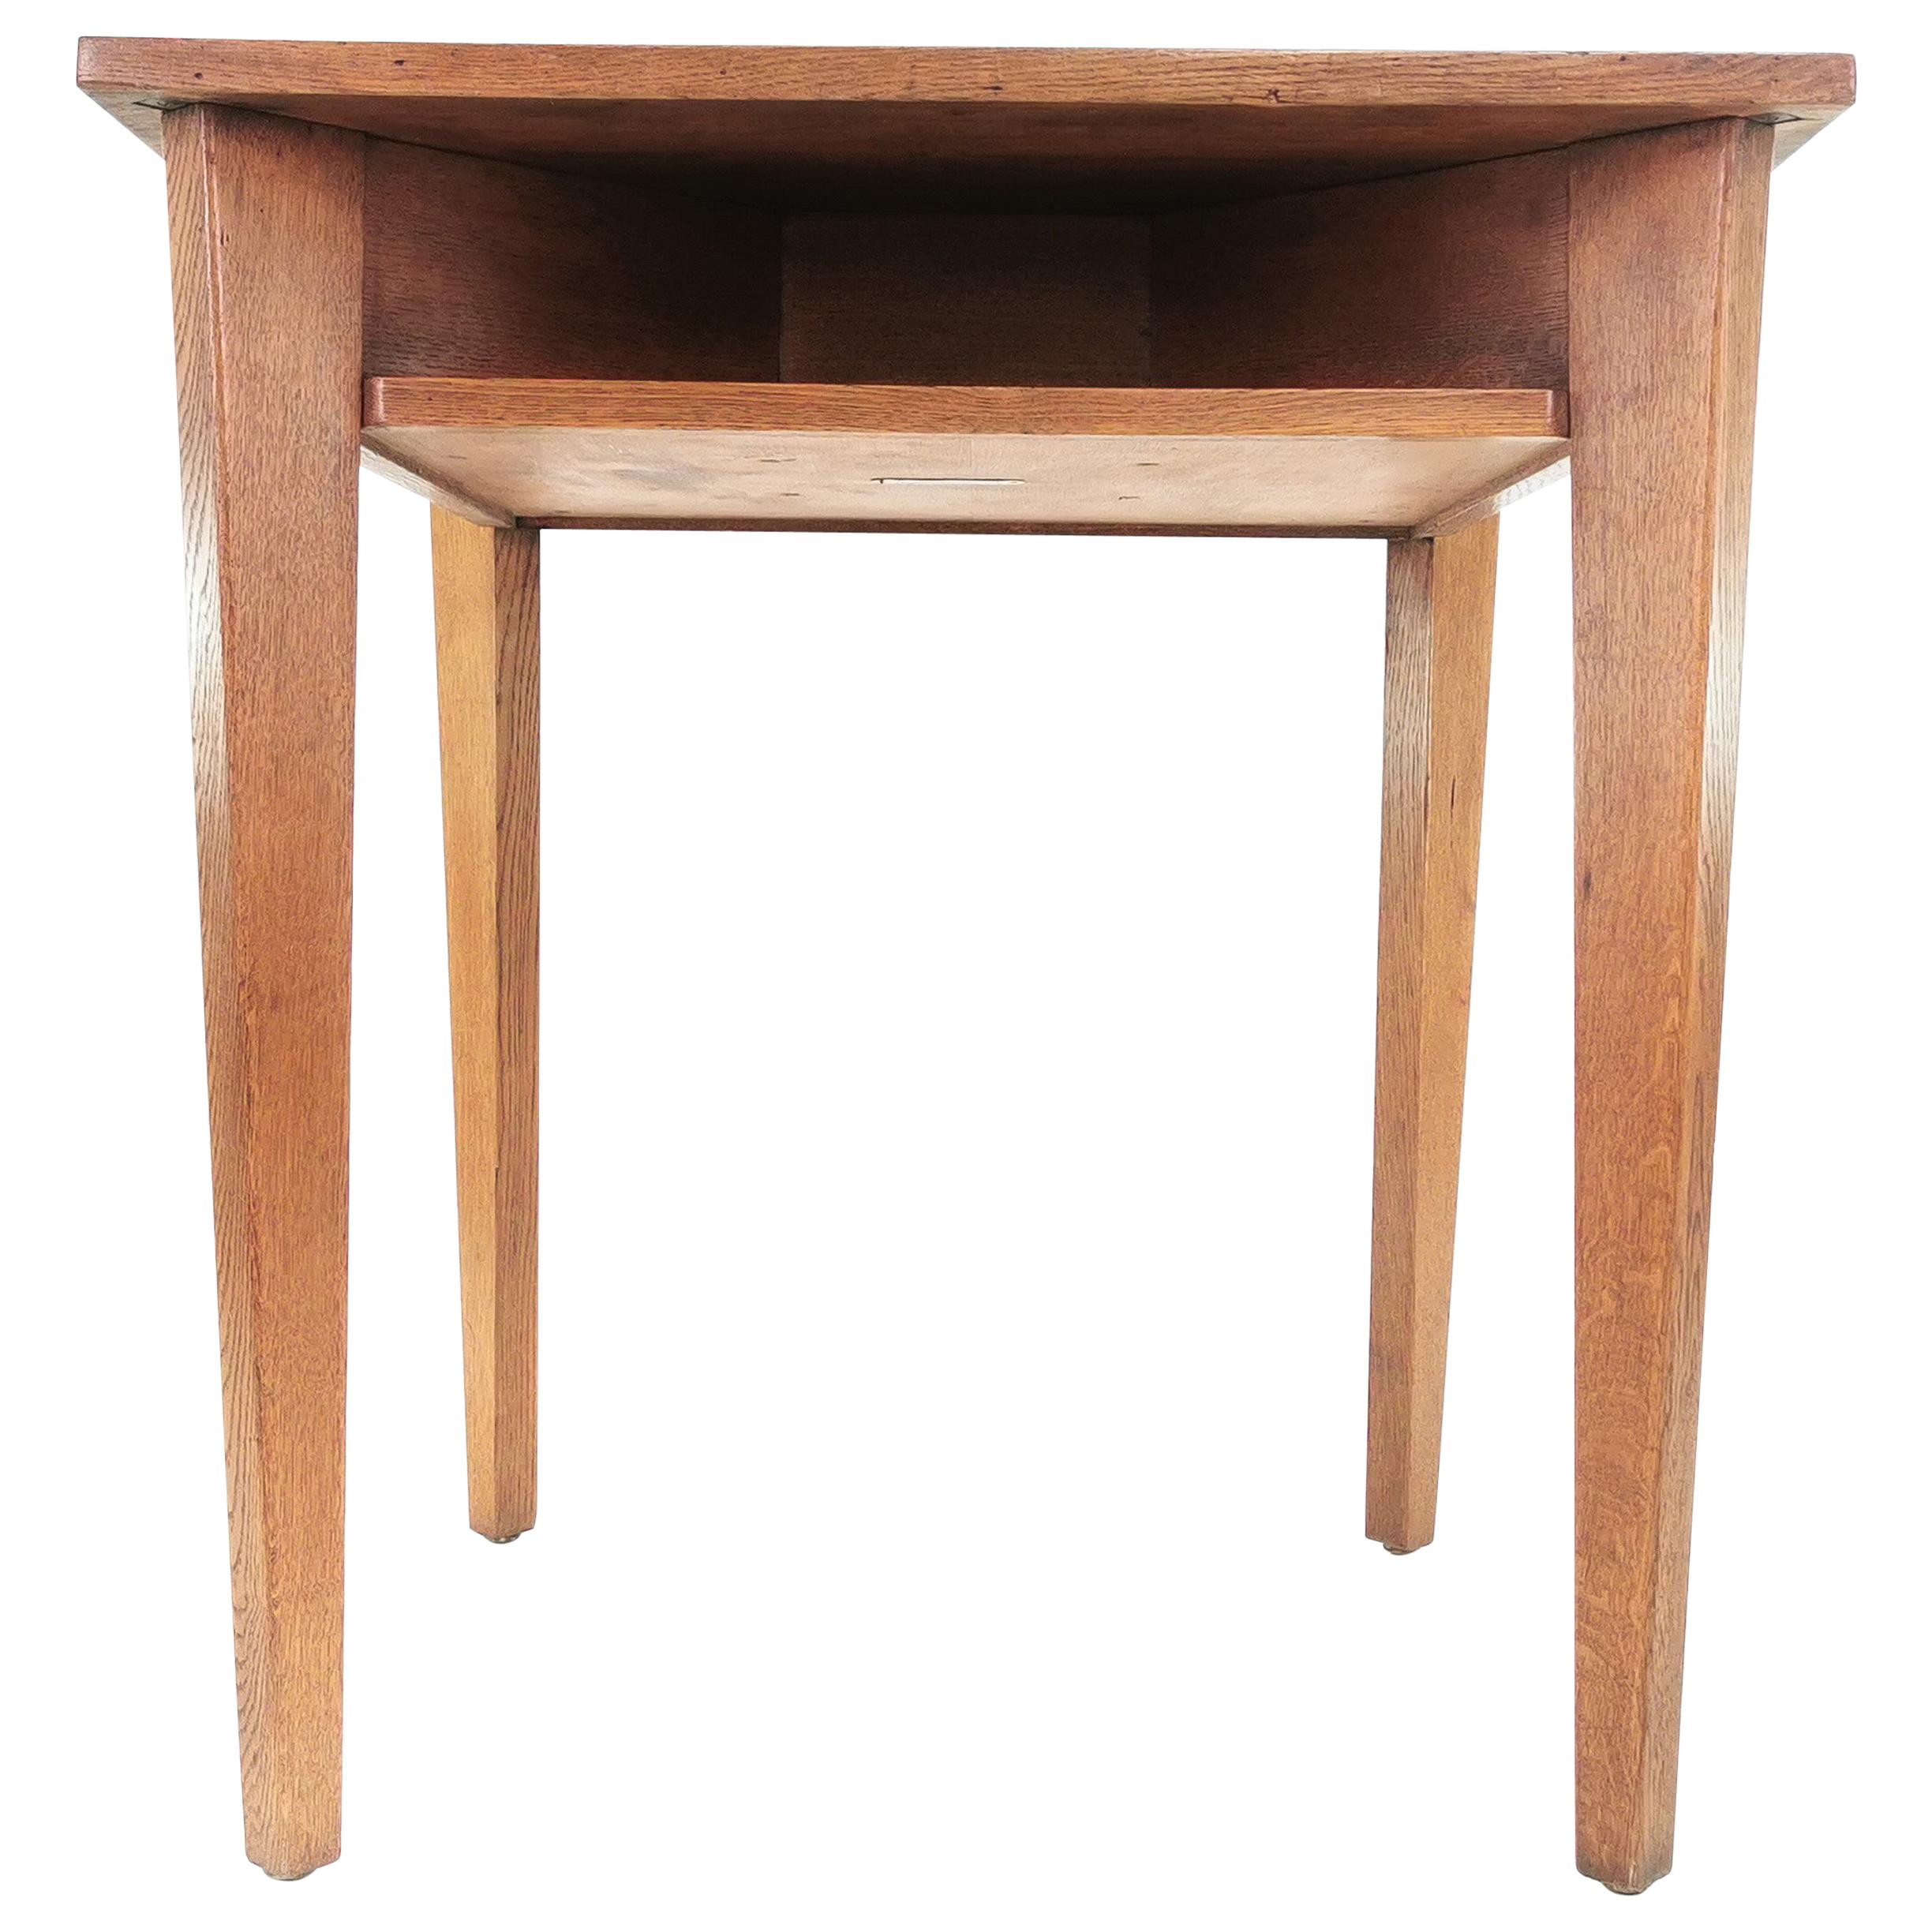 English Arts & Crafts Cotswold Gordon Russell Desk Side Occasional Table